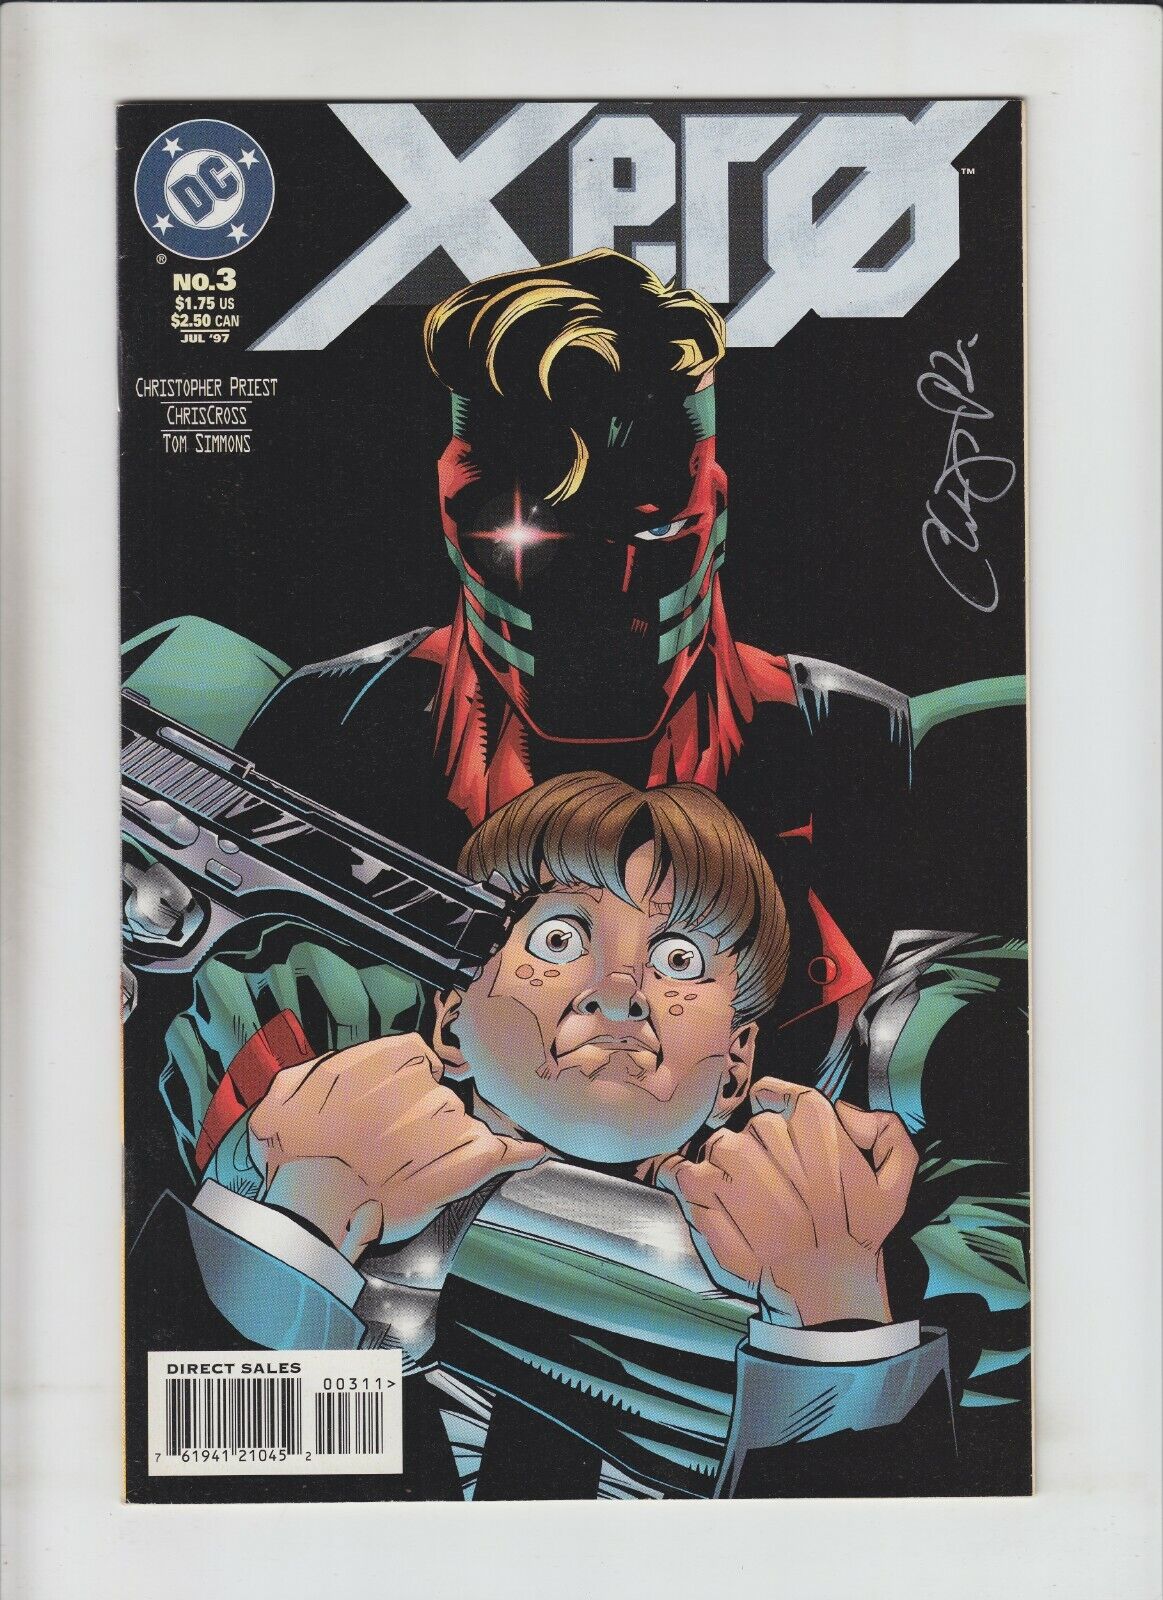 Xero #3 VF+ signed by Christopher Priest DC Comics ChrisCross 1997 50 Cent movie